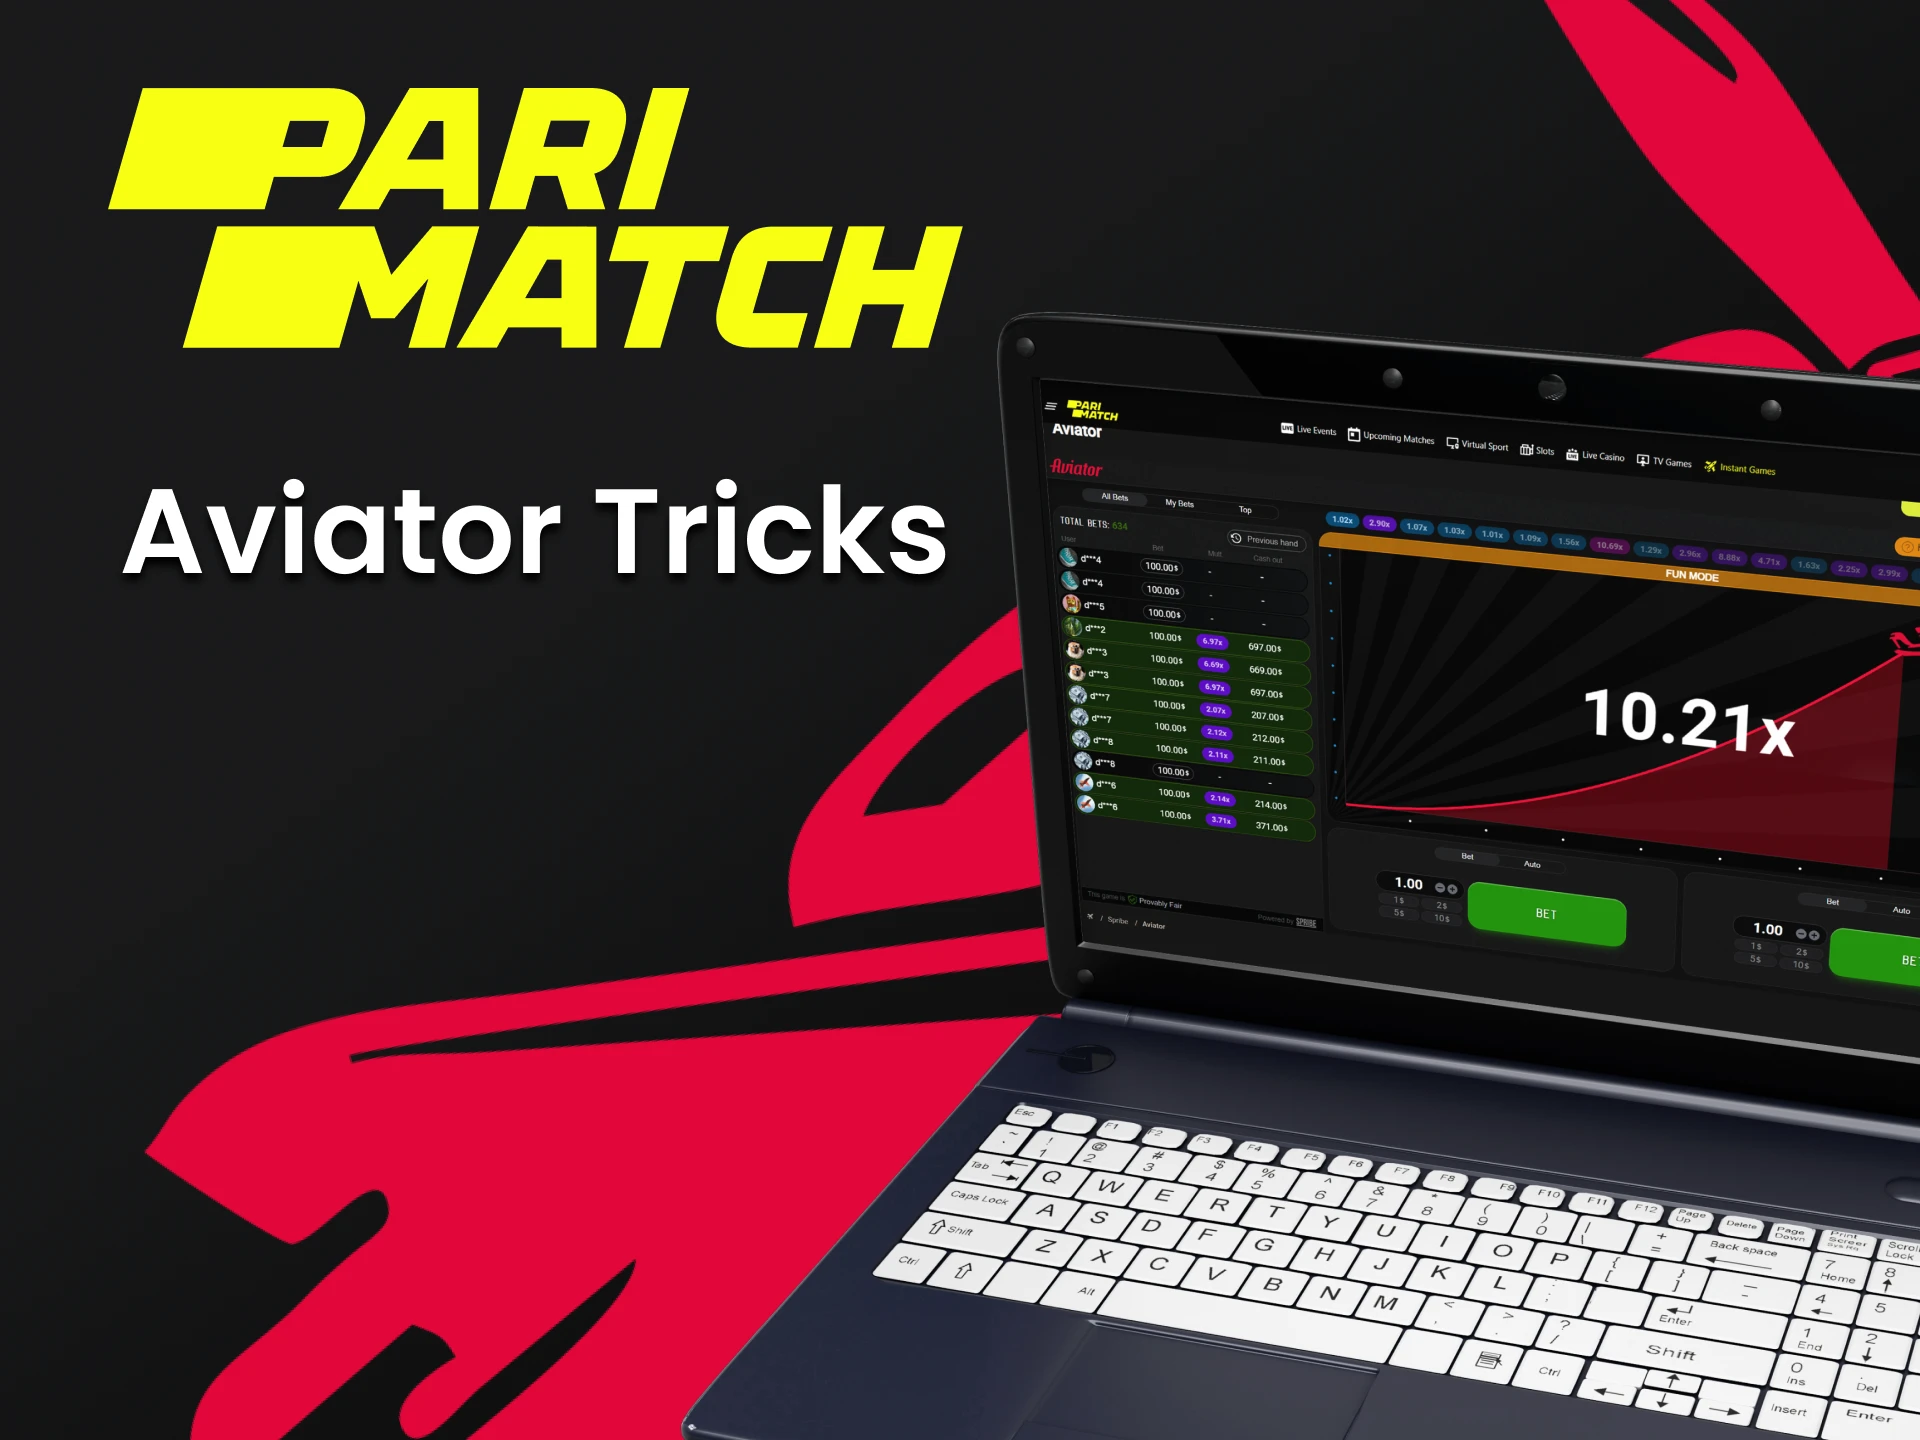 Learn special moves to win in the Aviator game on Perimatch.